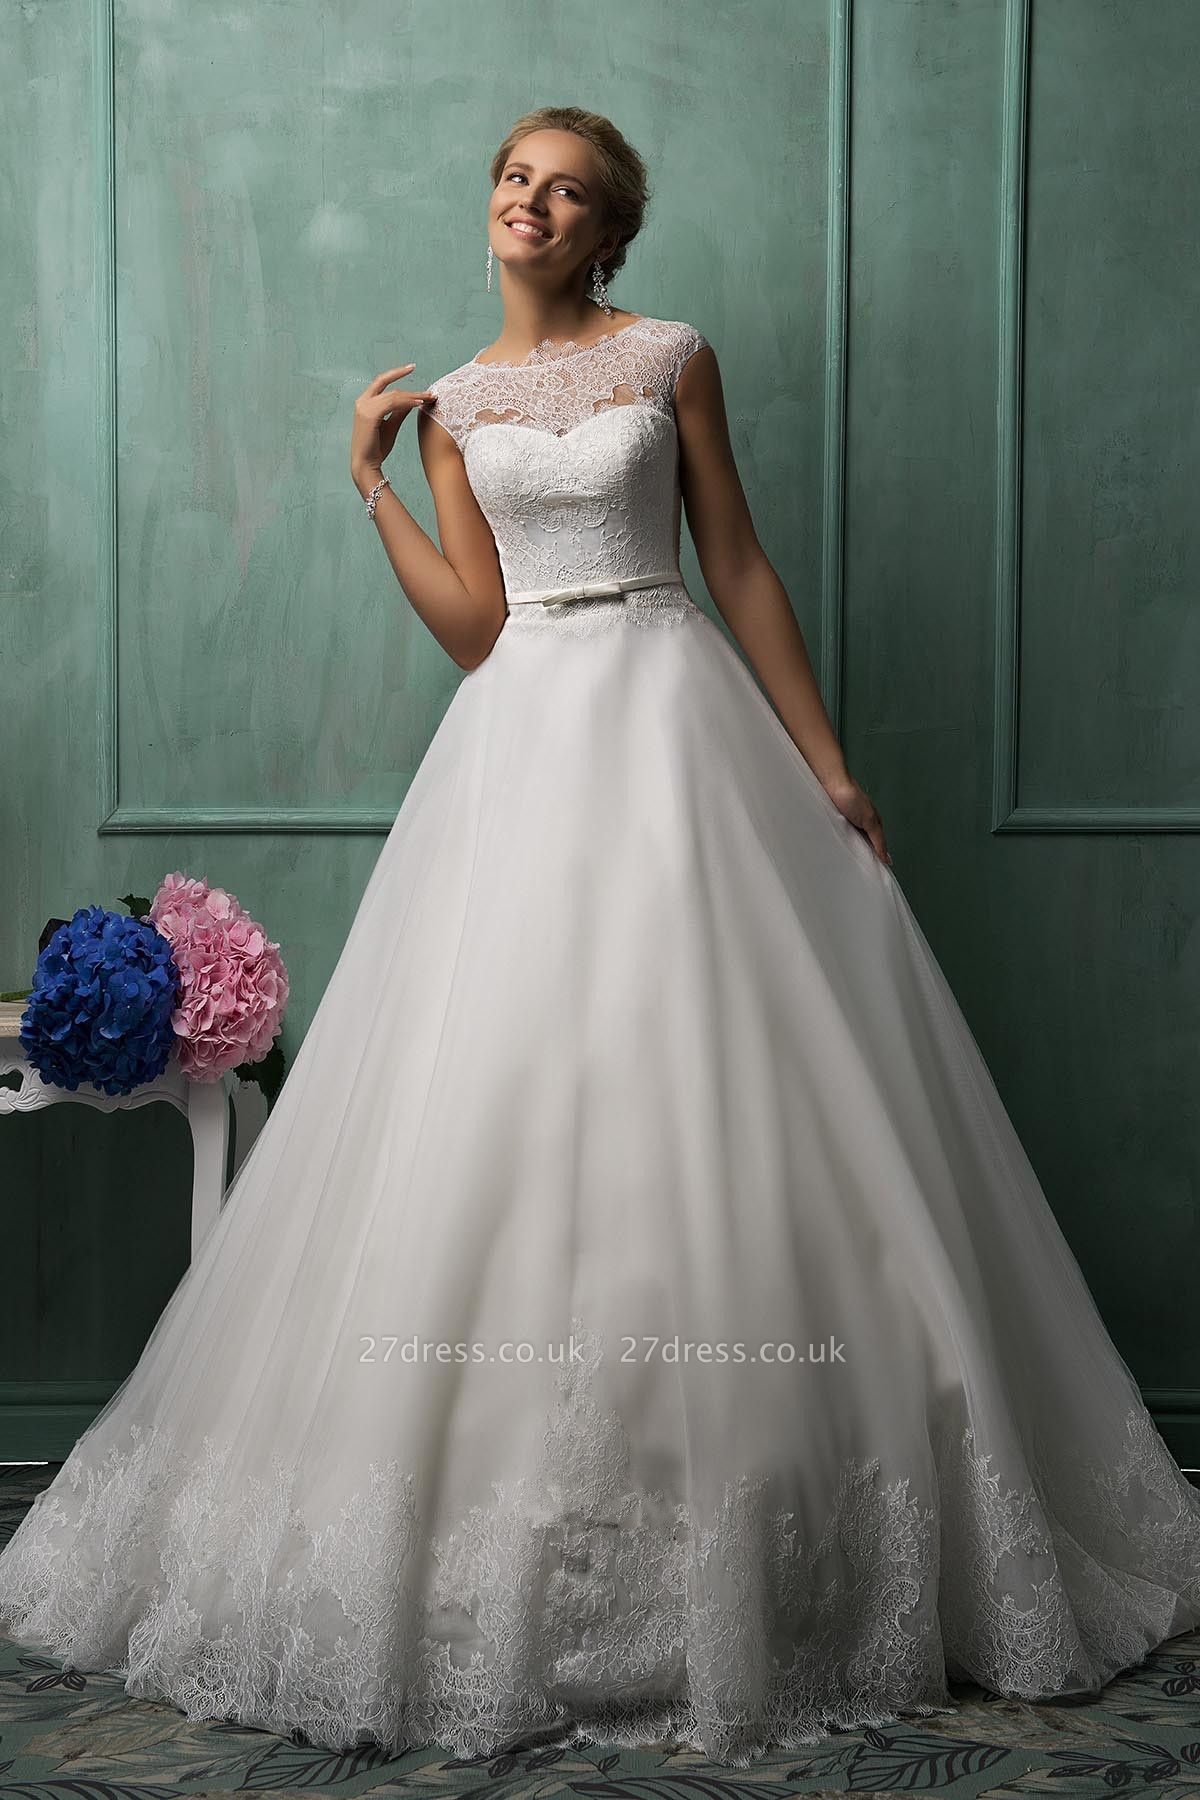 Elegant Illusion Cap Sleeve Tulle Wedding Dress With Lace Appliques